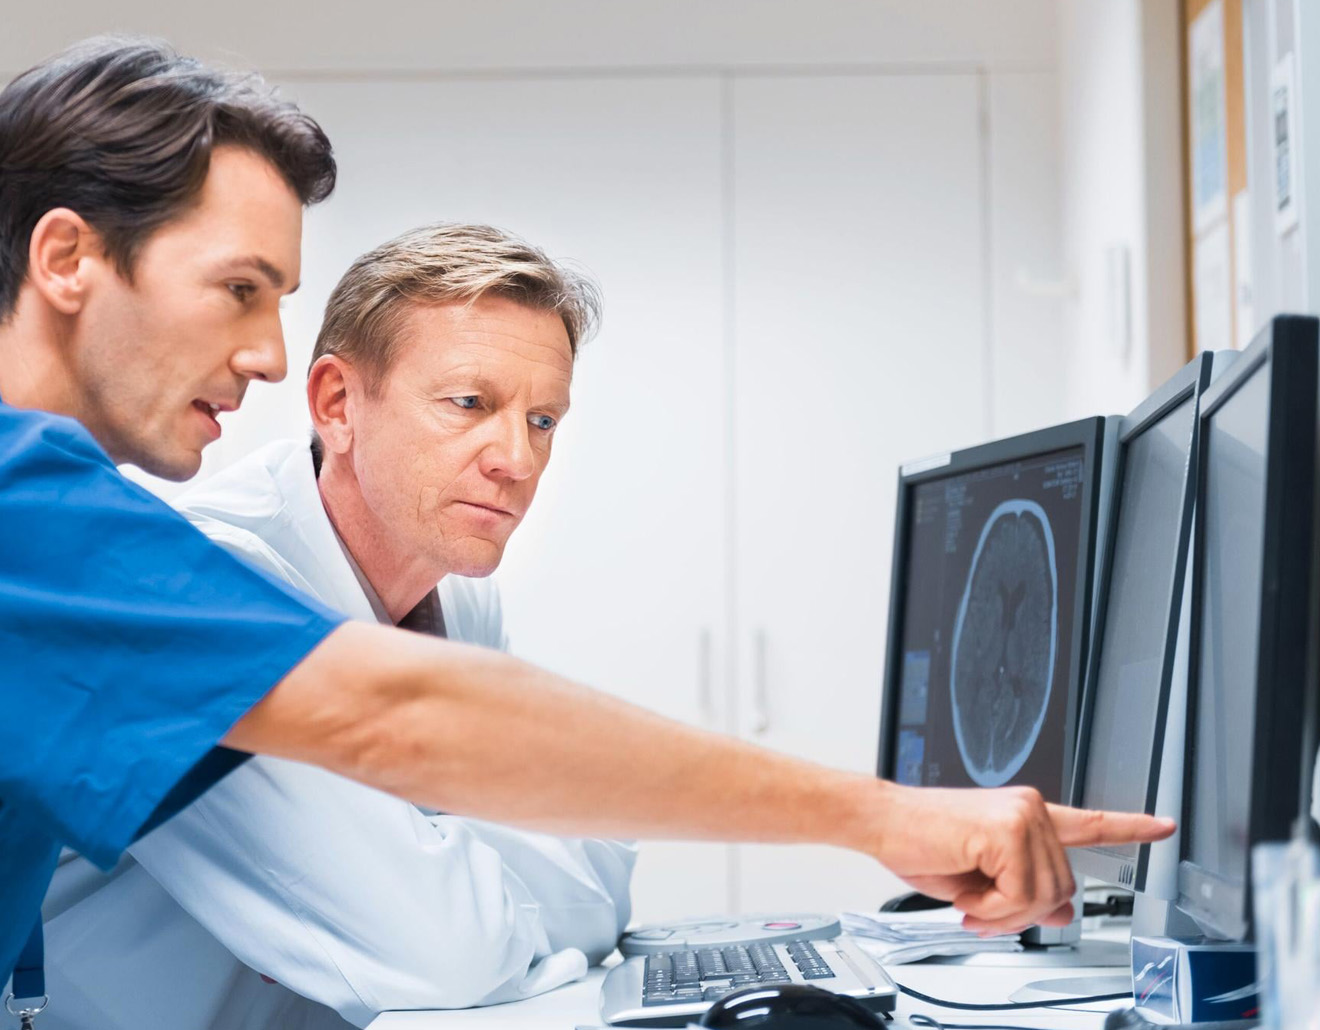 About Vital Radiology